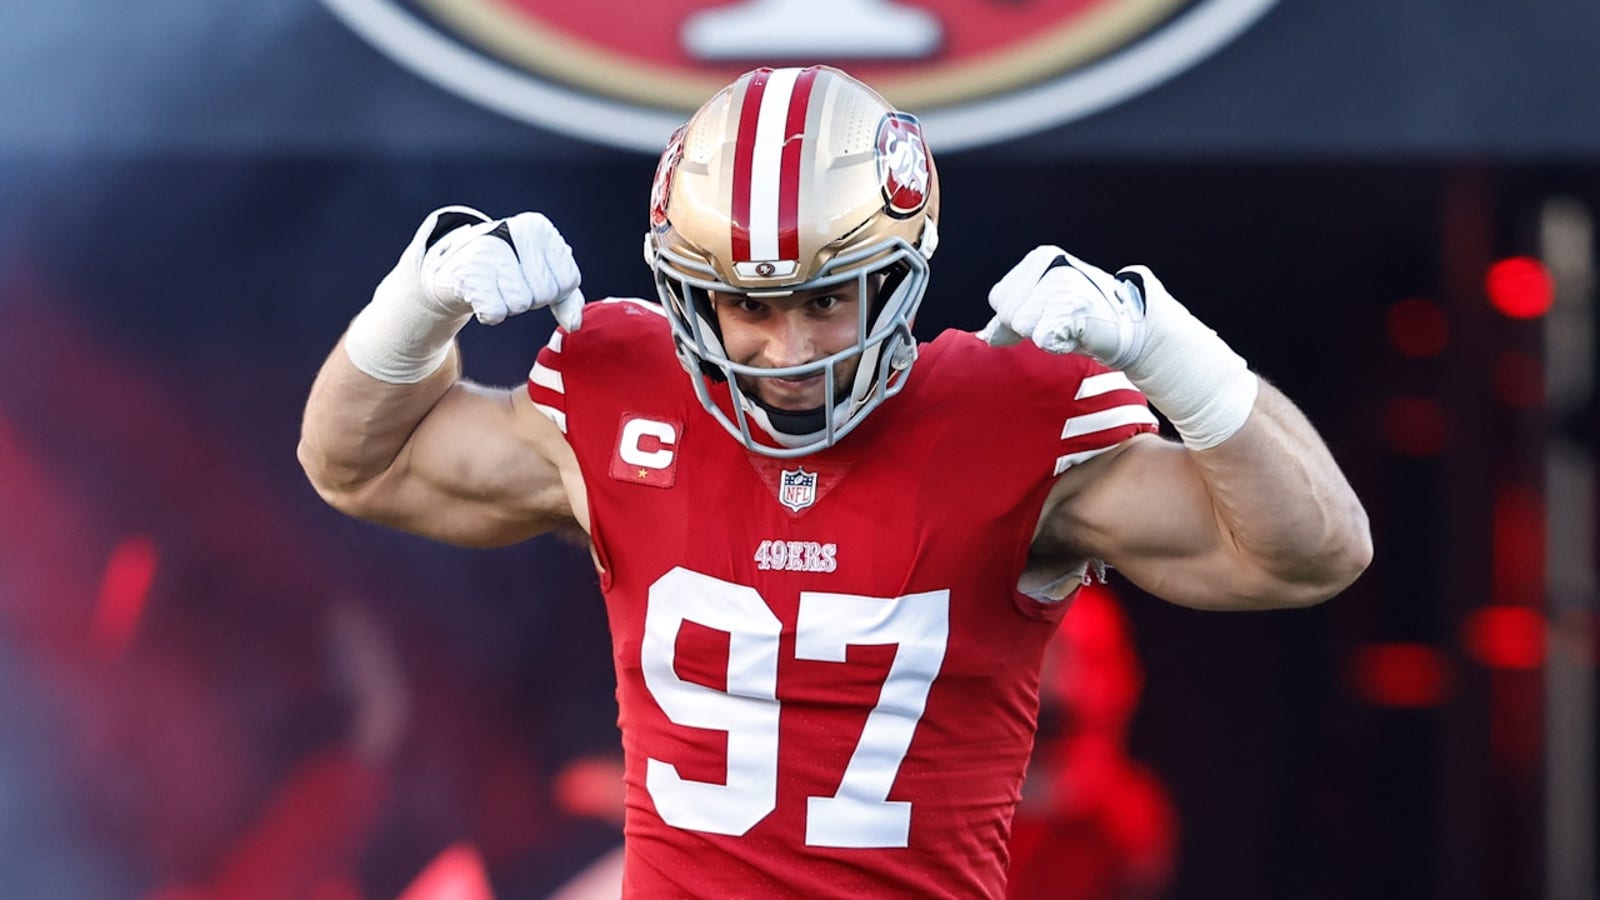 49ers' Nick Bosa Wins 'NFL on FOX' Defensive Player of the Year